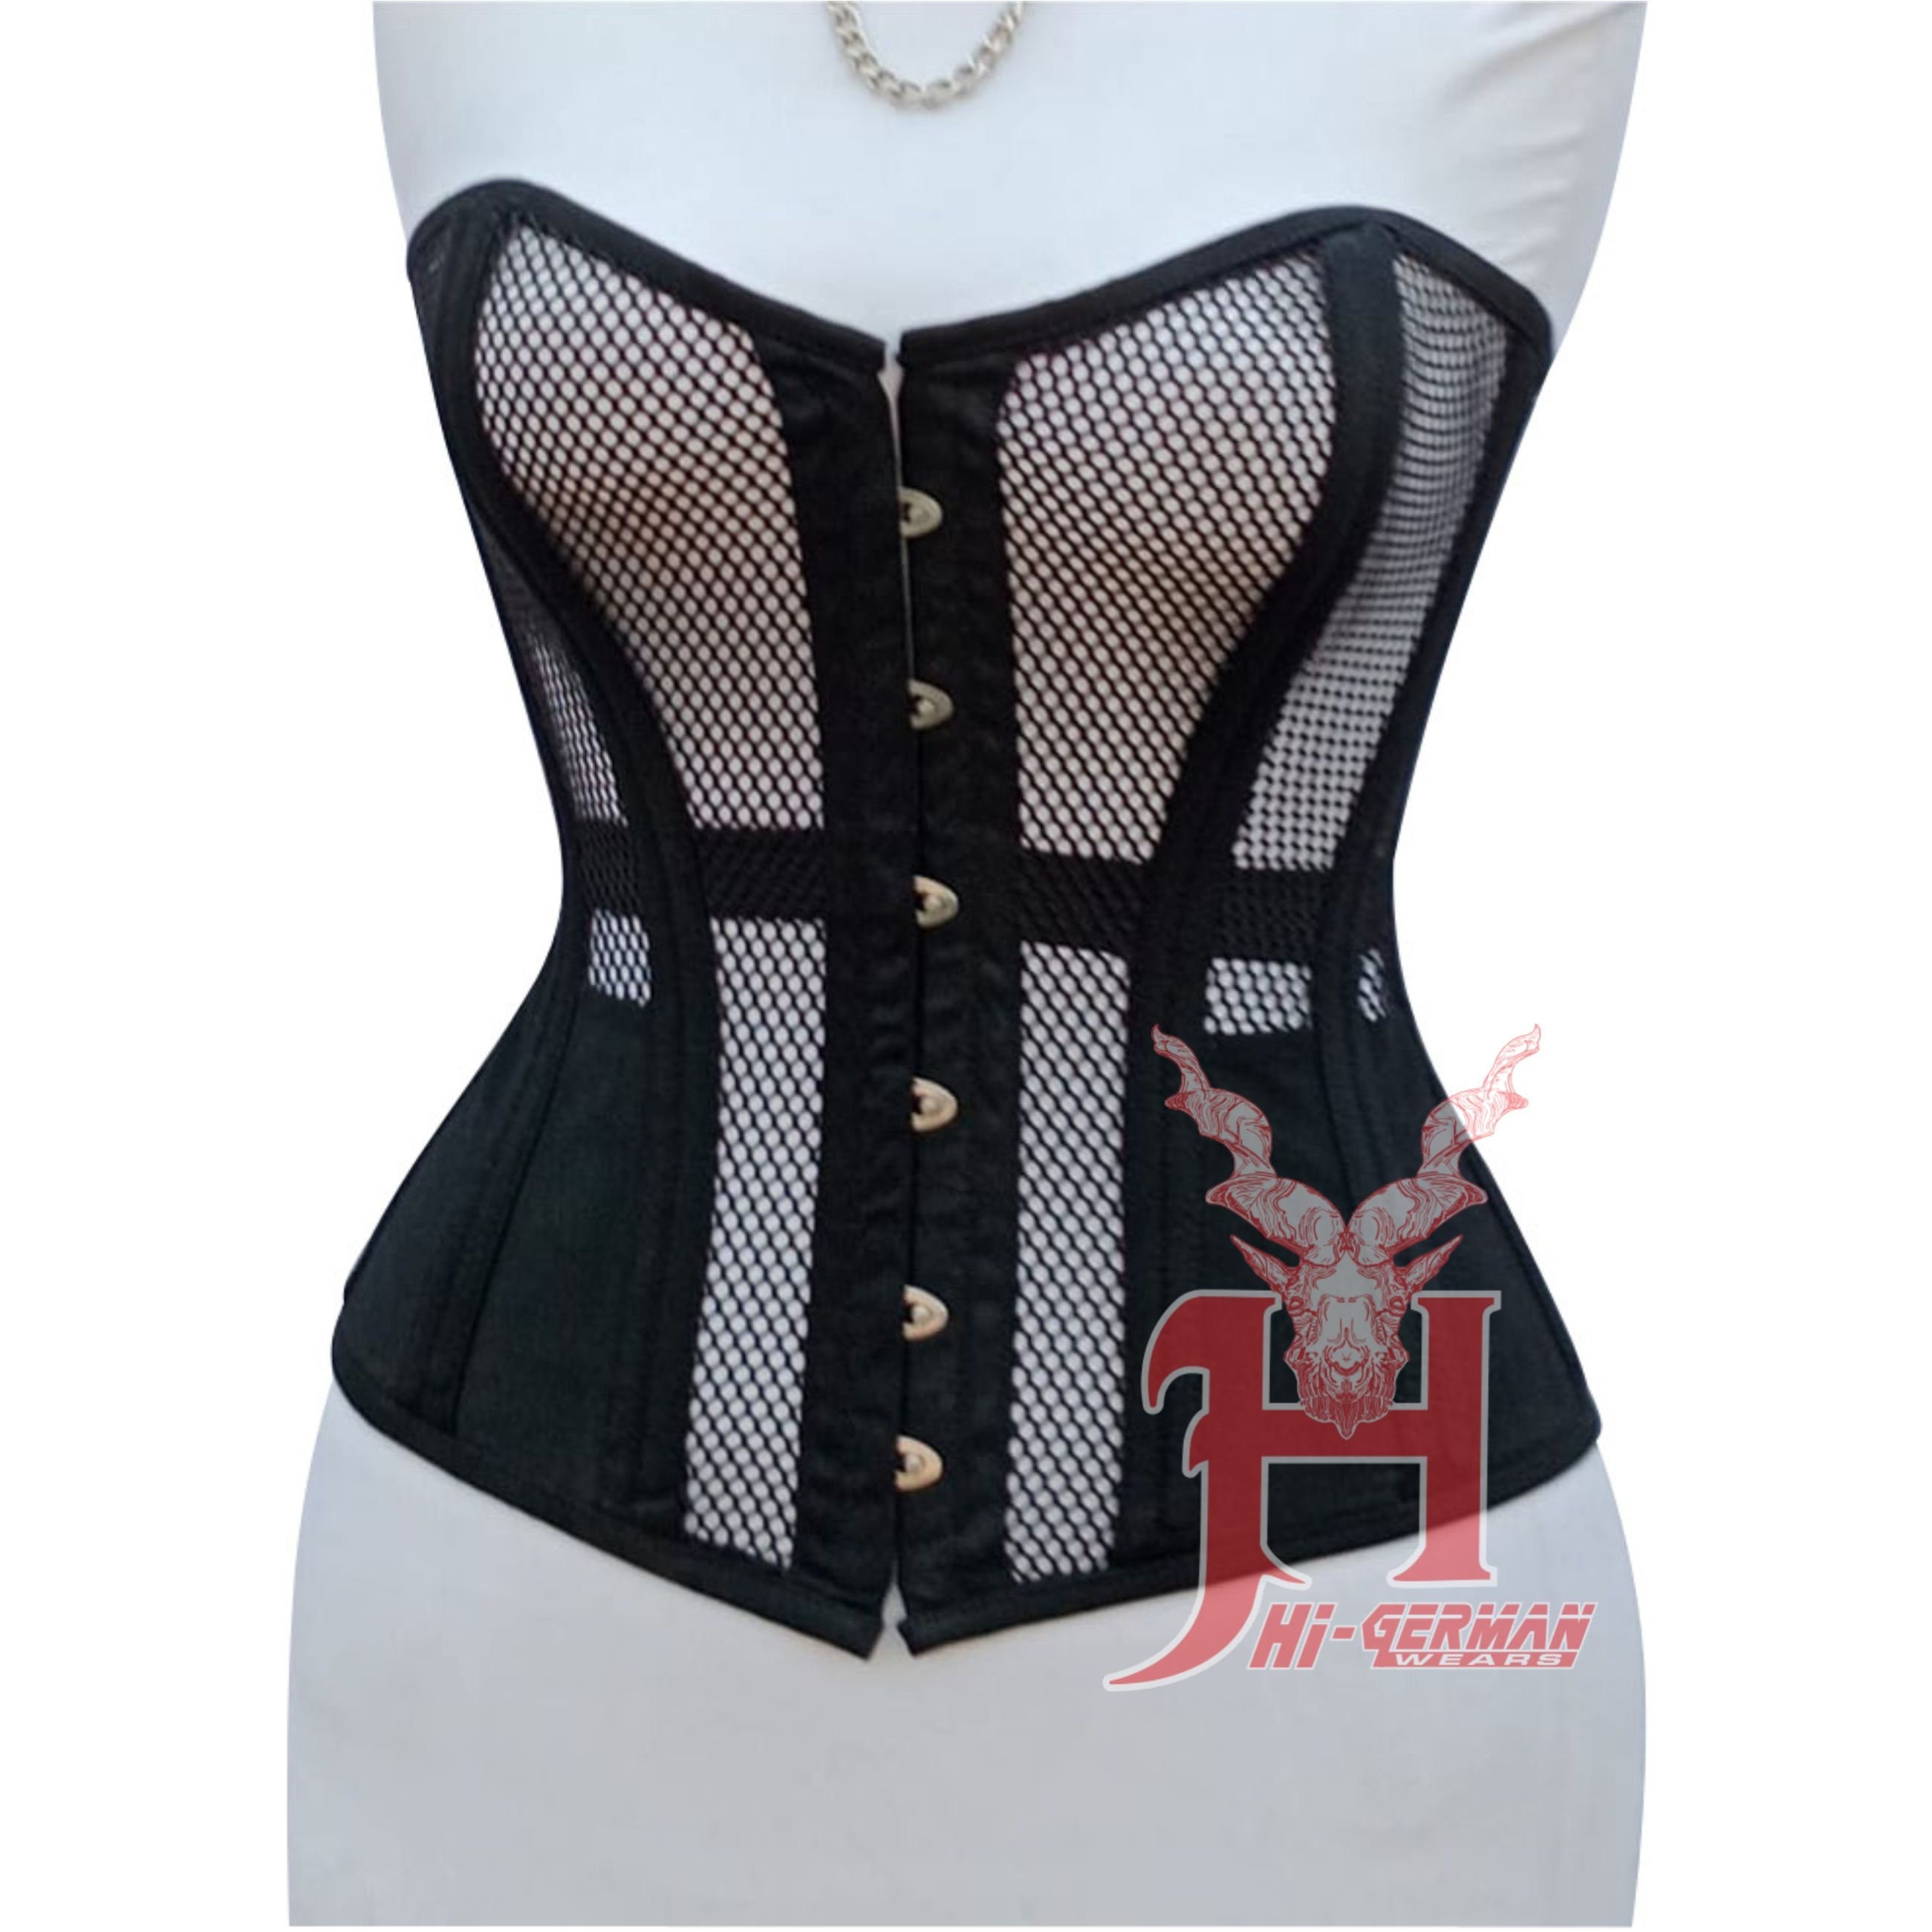 Cotton Overbust Corset in Black